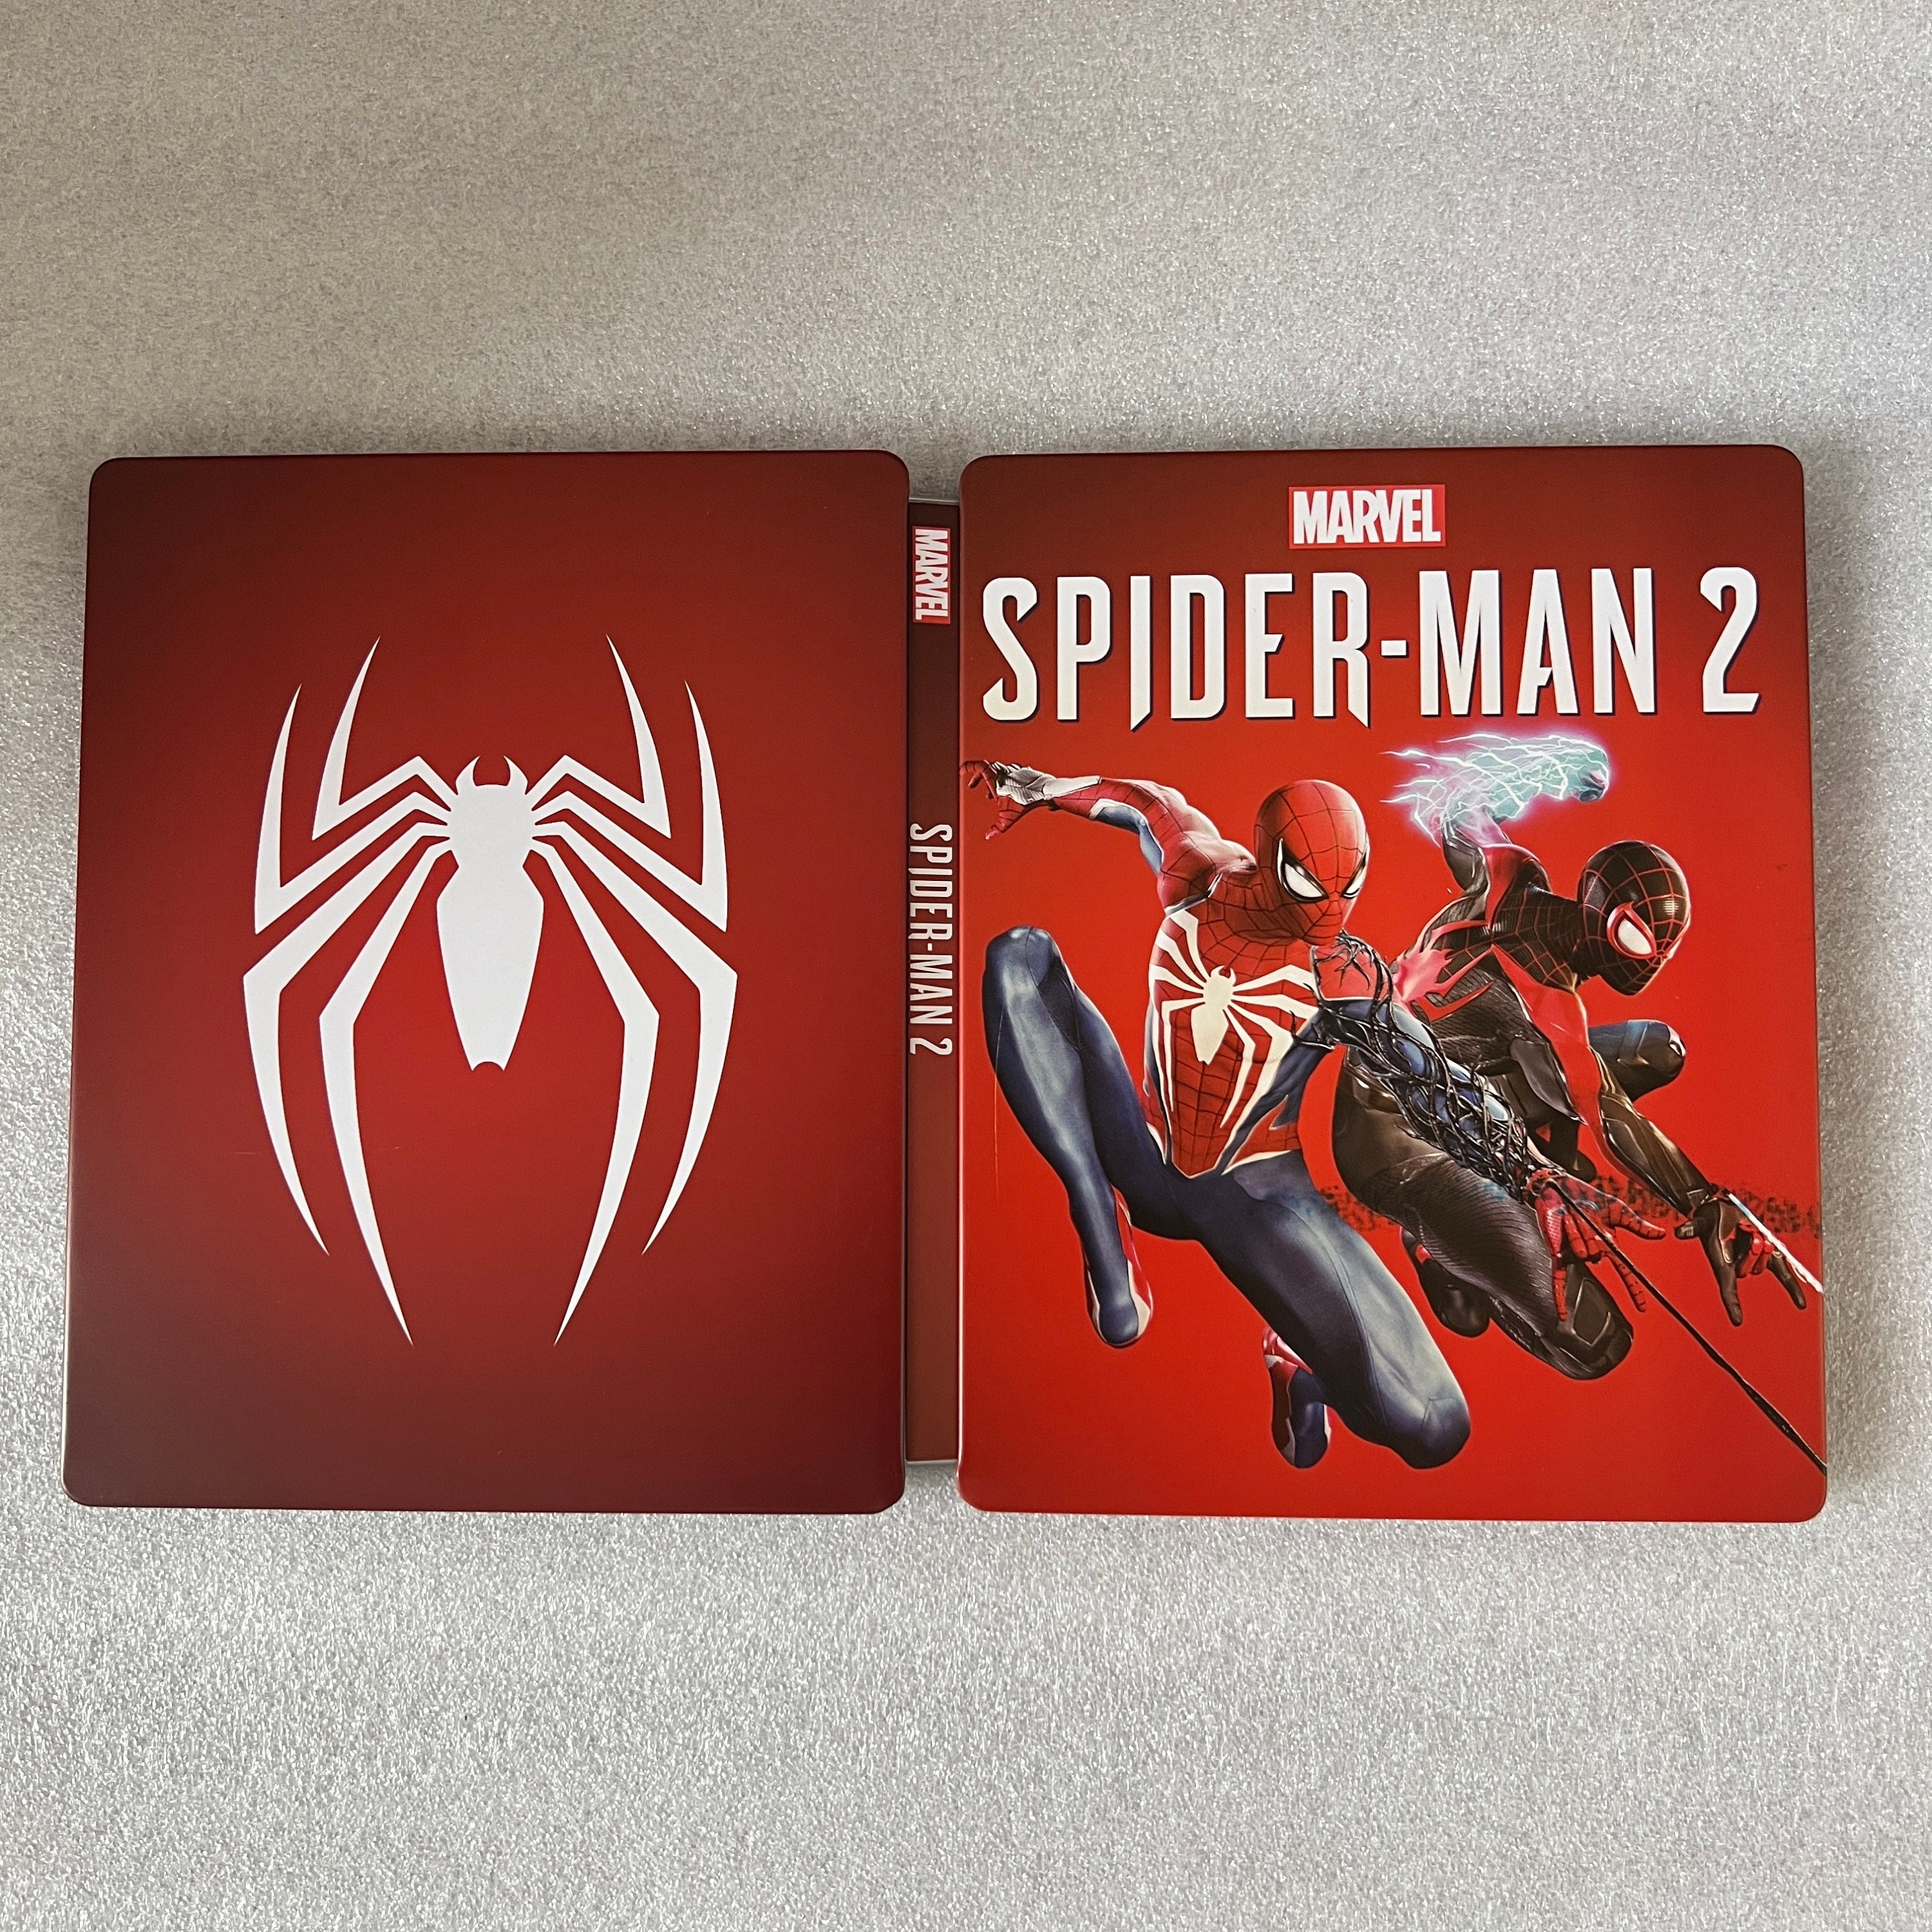 Marvel's Spider-Man 2 Collector's Edition (No Game) STEELBOOK ONLY  STEELCASE PS5